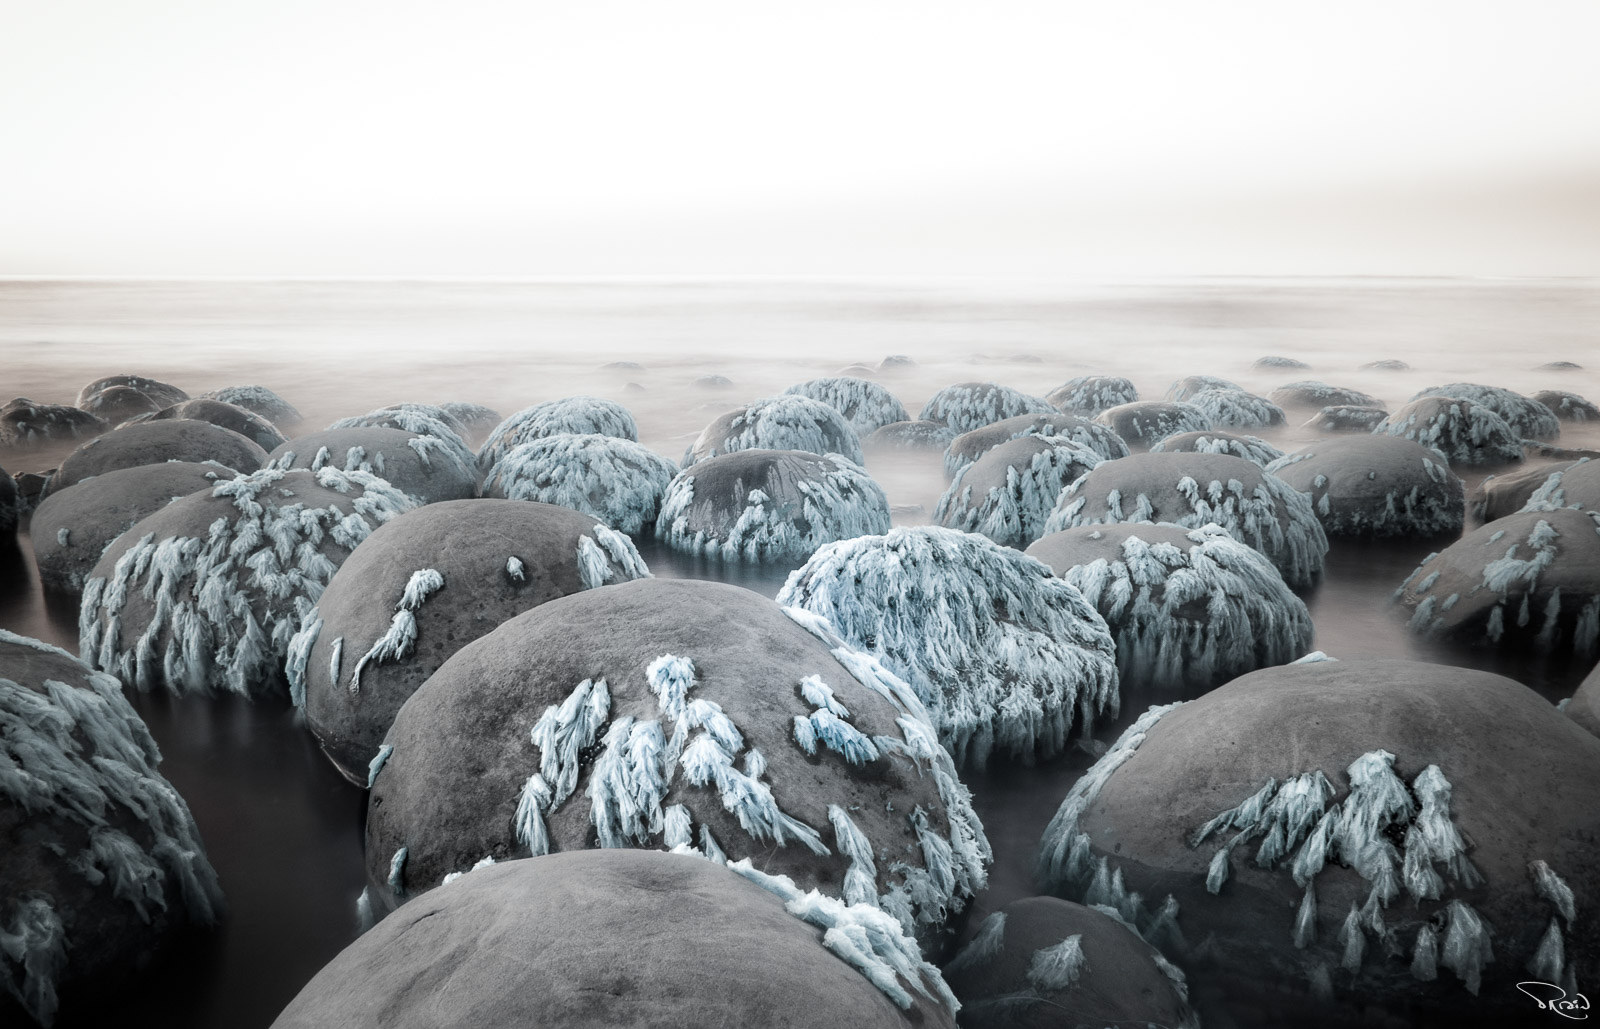 A misty, foggy shoreline is crowded with round, seaweed-covered rocks. 